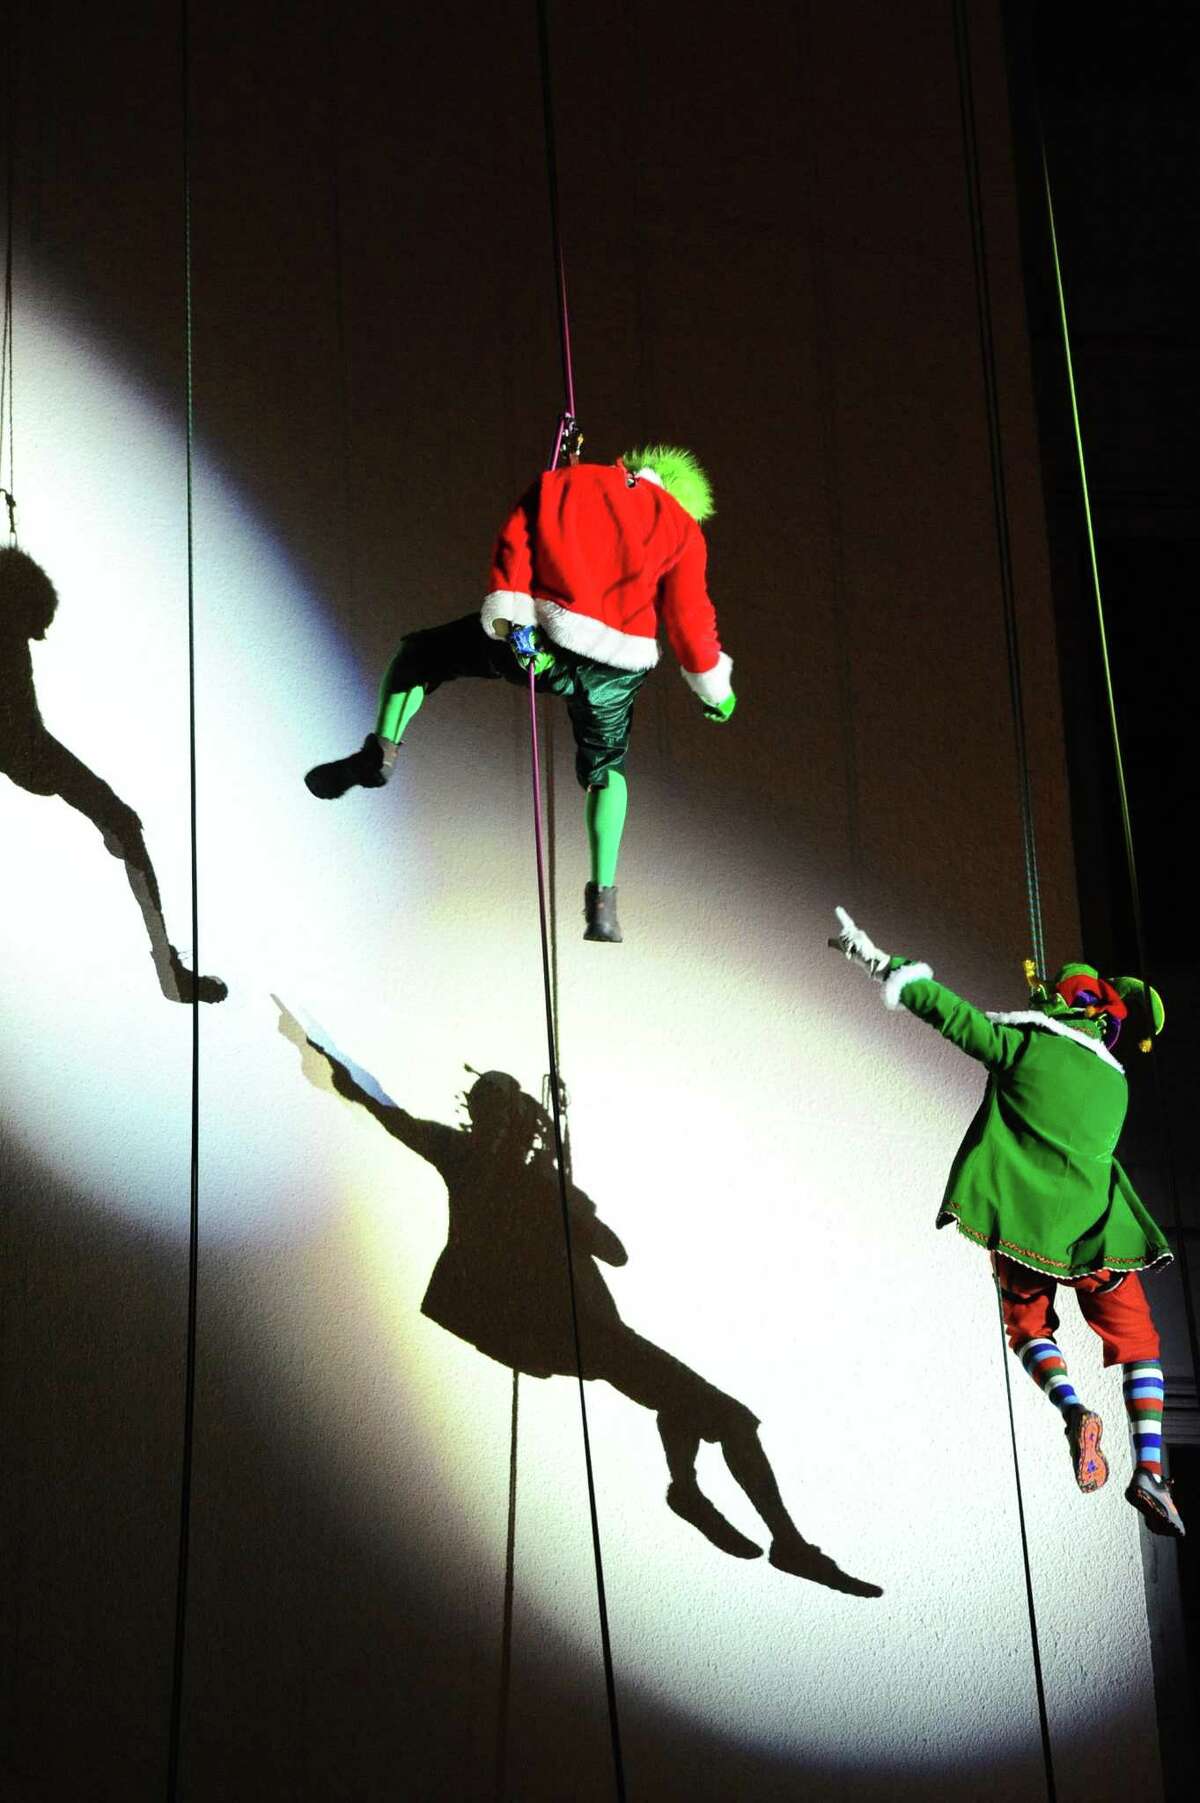 Yankees General Manager Brian Cashman, dressed as an elf, fights Jason Teitelbaum, dressed as the Grinch, while rappelling down the Landmark Building during the 2016 Heights & Lights Rappel in Stamford, Conn. on Sunday, Dec. 4, 2016. The annual holiday tradition returns to Stamford’s Landmark Square Sunday at 5 p.m.